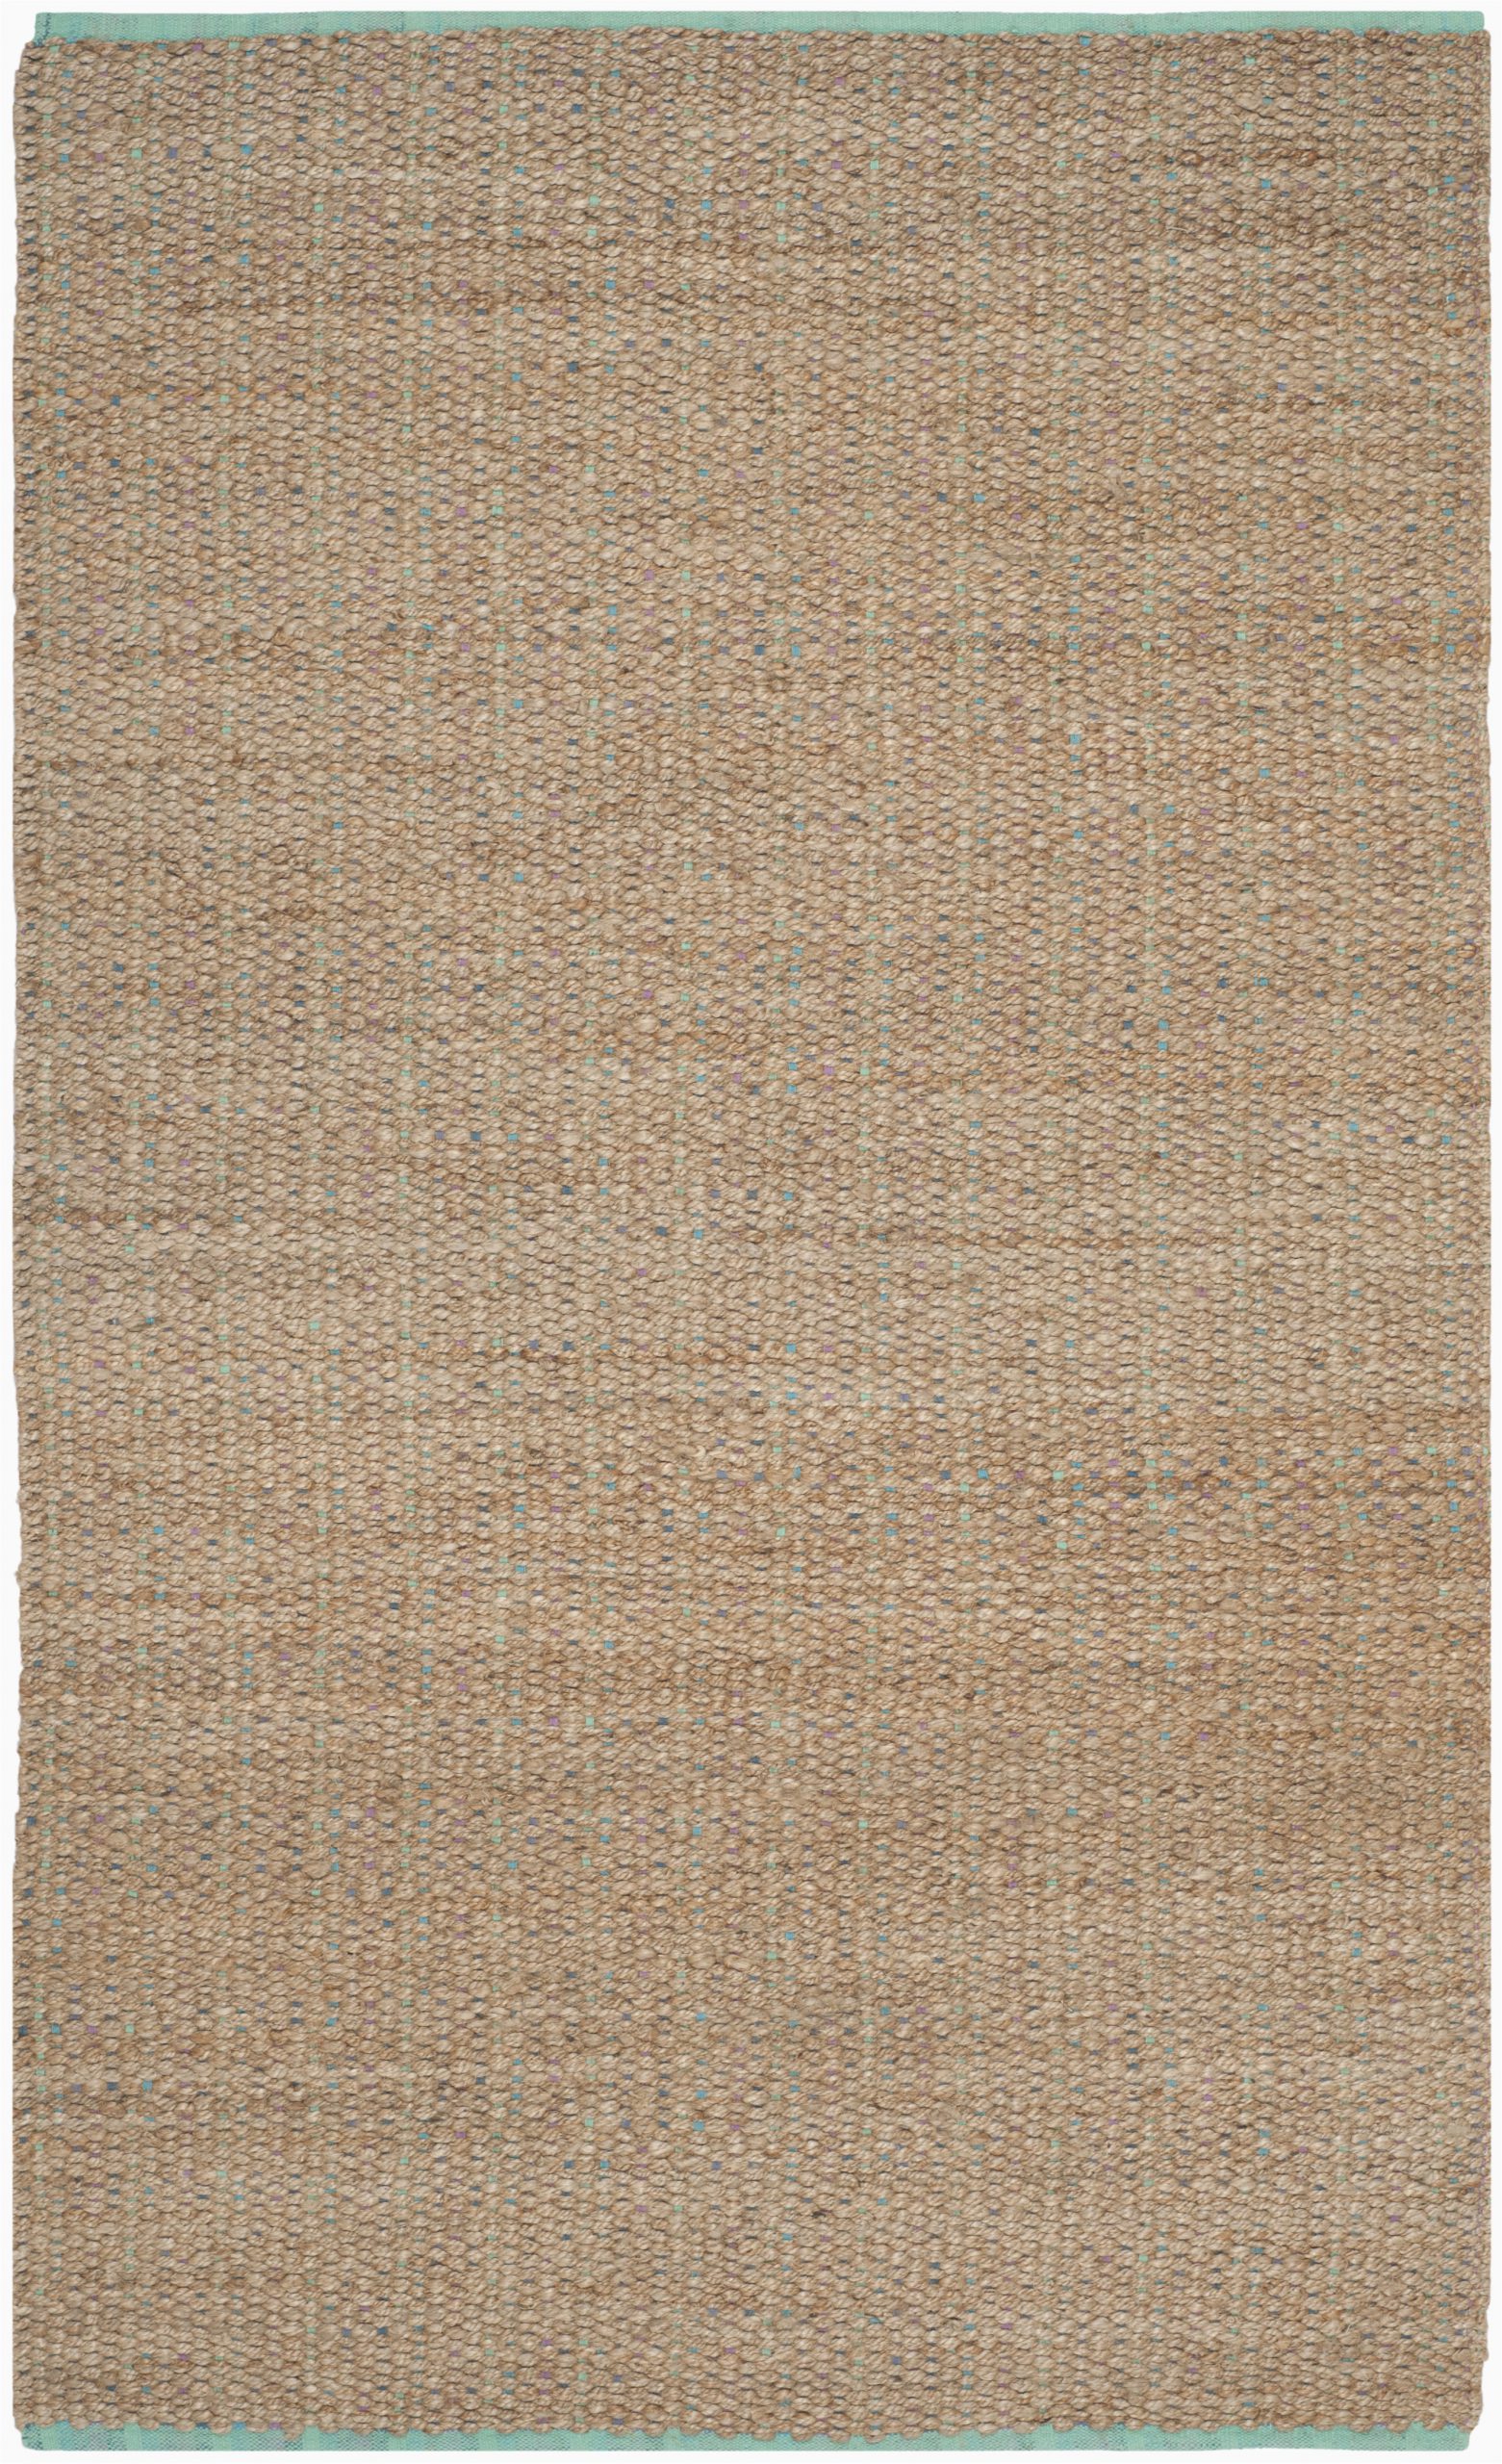 Solid Color area Rugs Lowes Safavieh Cape Cod solid Rug 4 X 6 Jute Beige